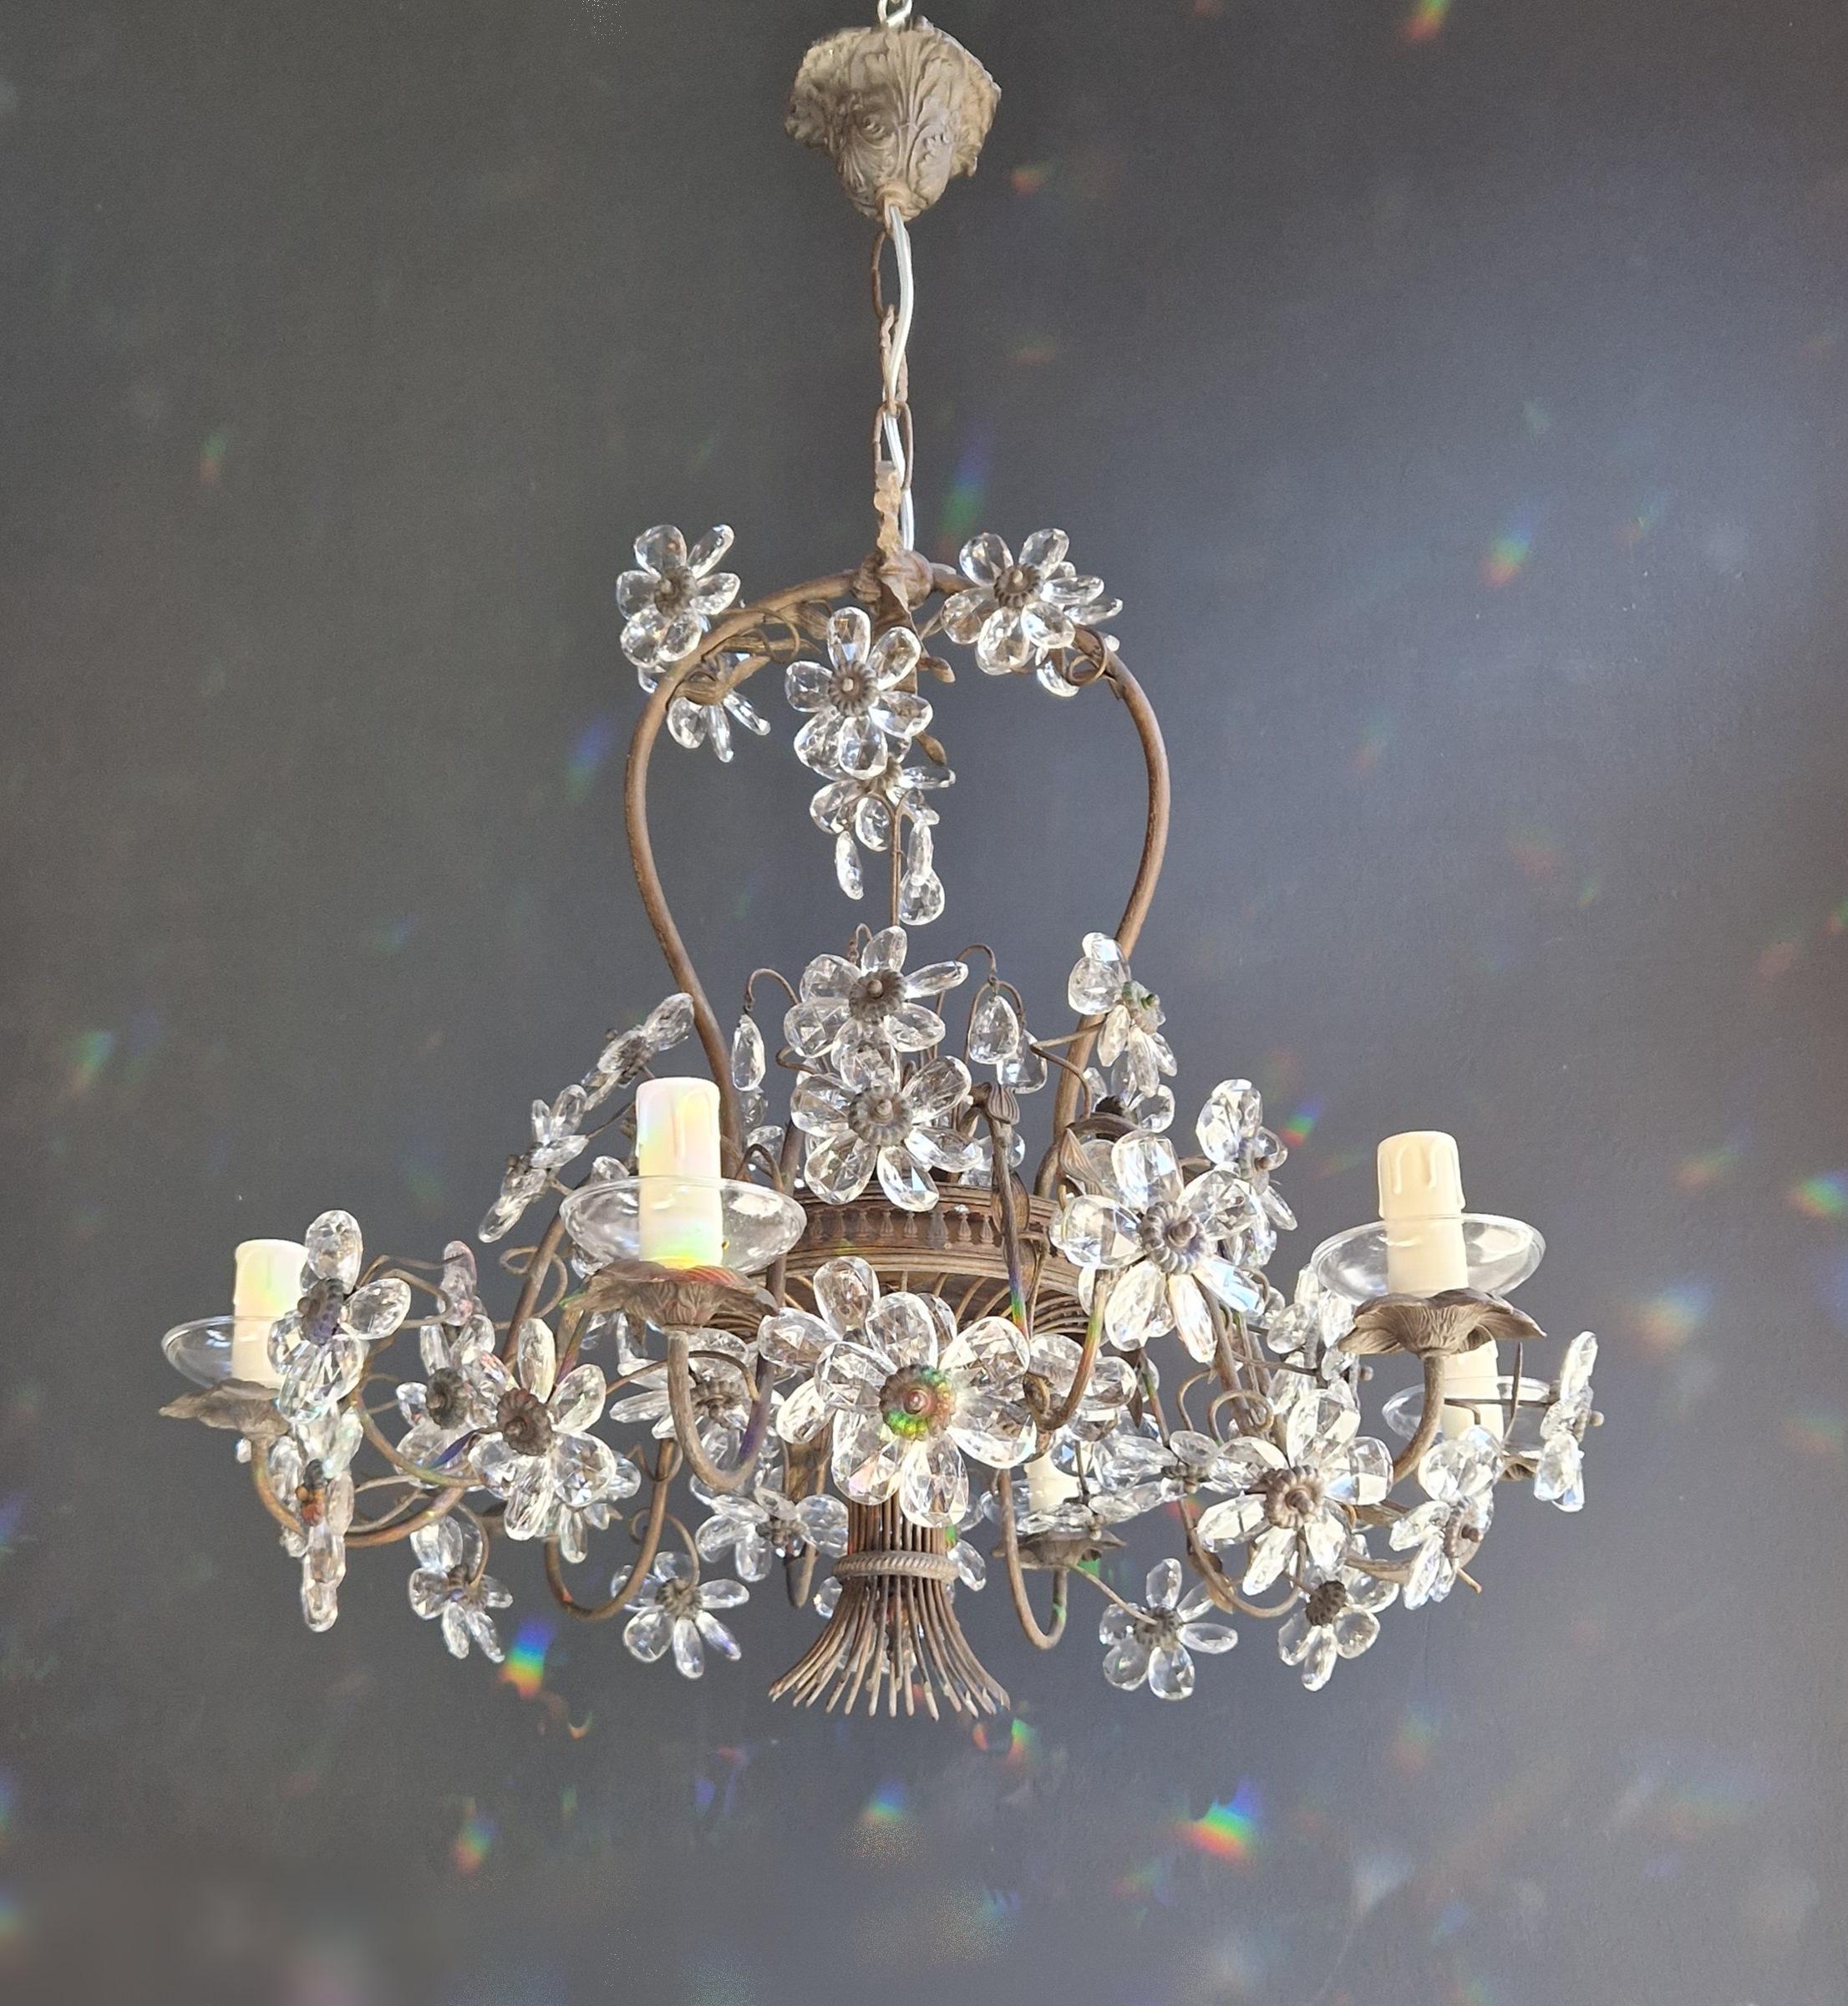 Introducing our exquisite antique chandelier, lovingly and professionally restored in Berlin. The electrical wiring is compatible with the US, as it has been re-wired and is ready to hang. Rest assured, not a single crystal is missing, as the